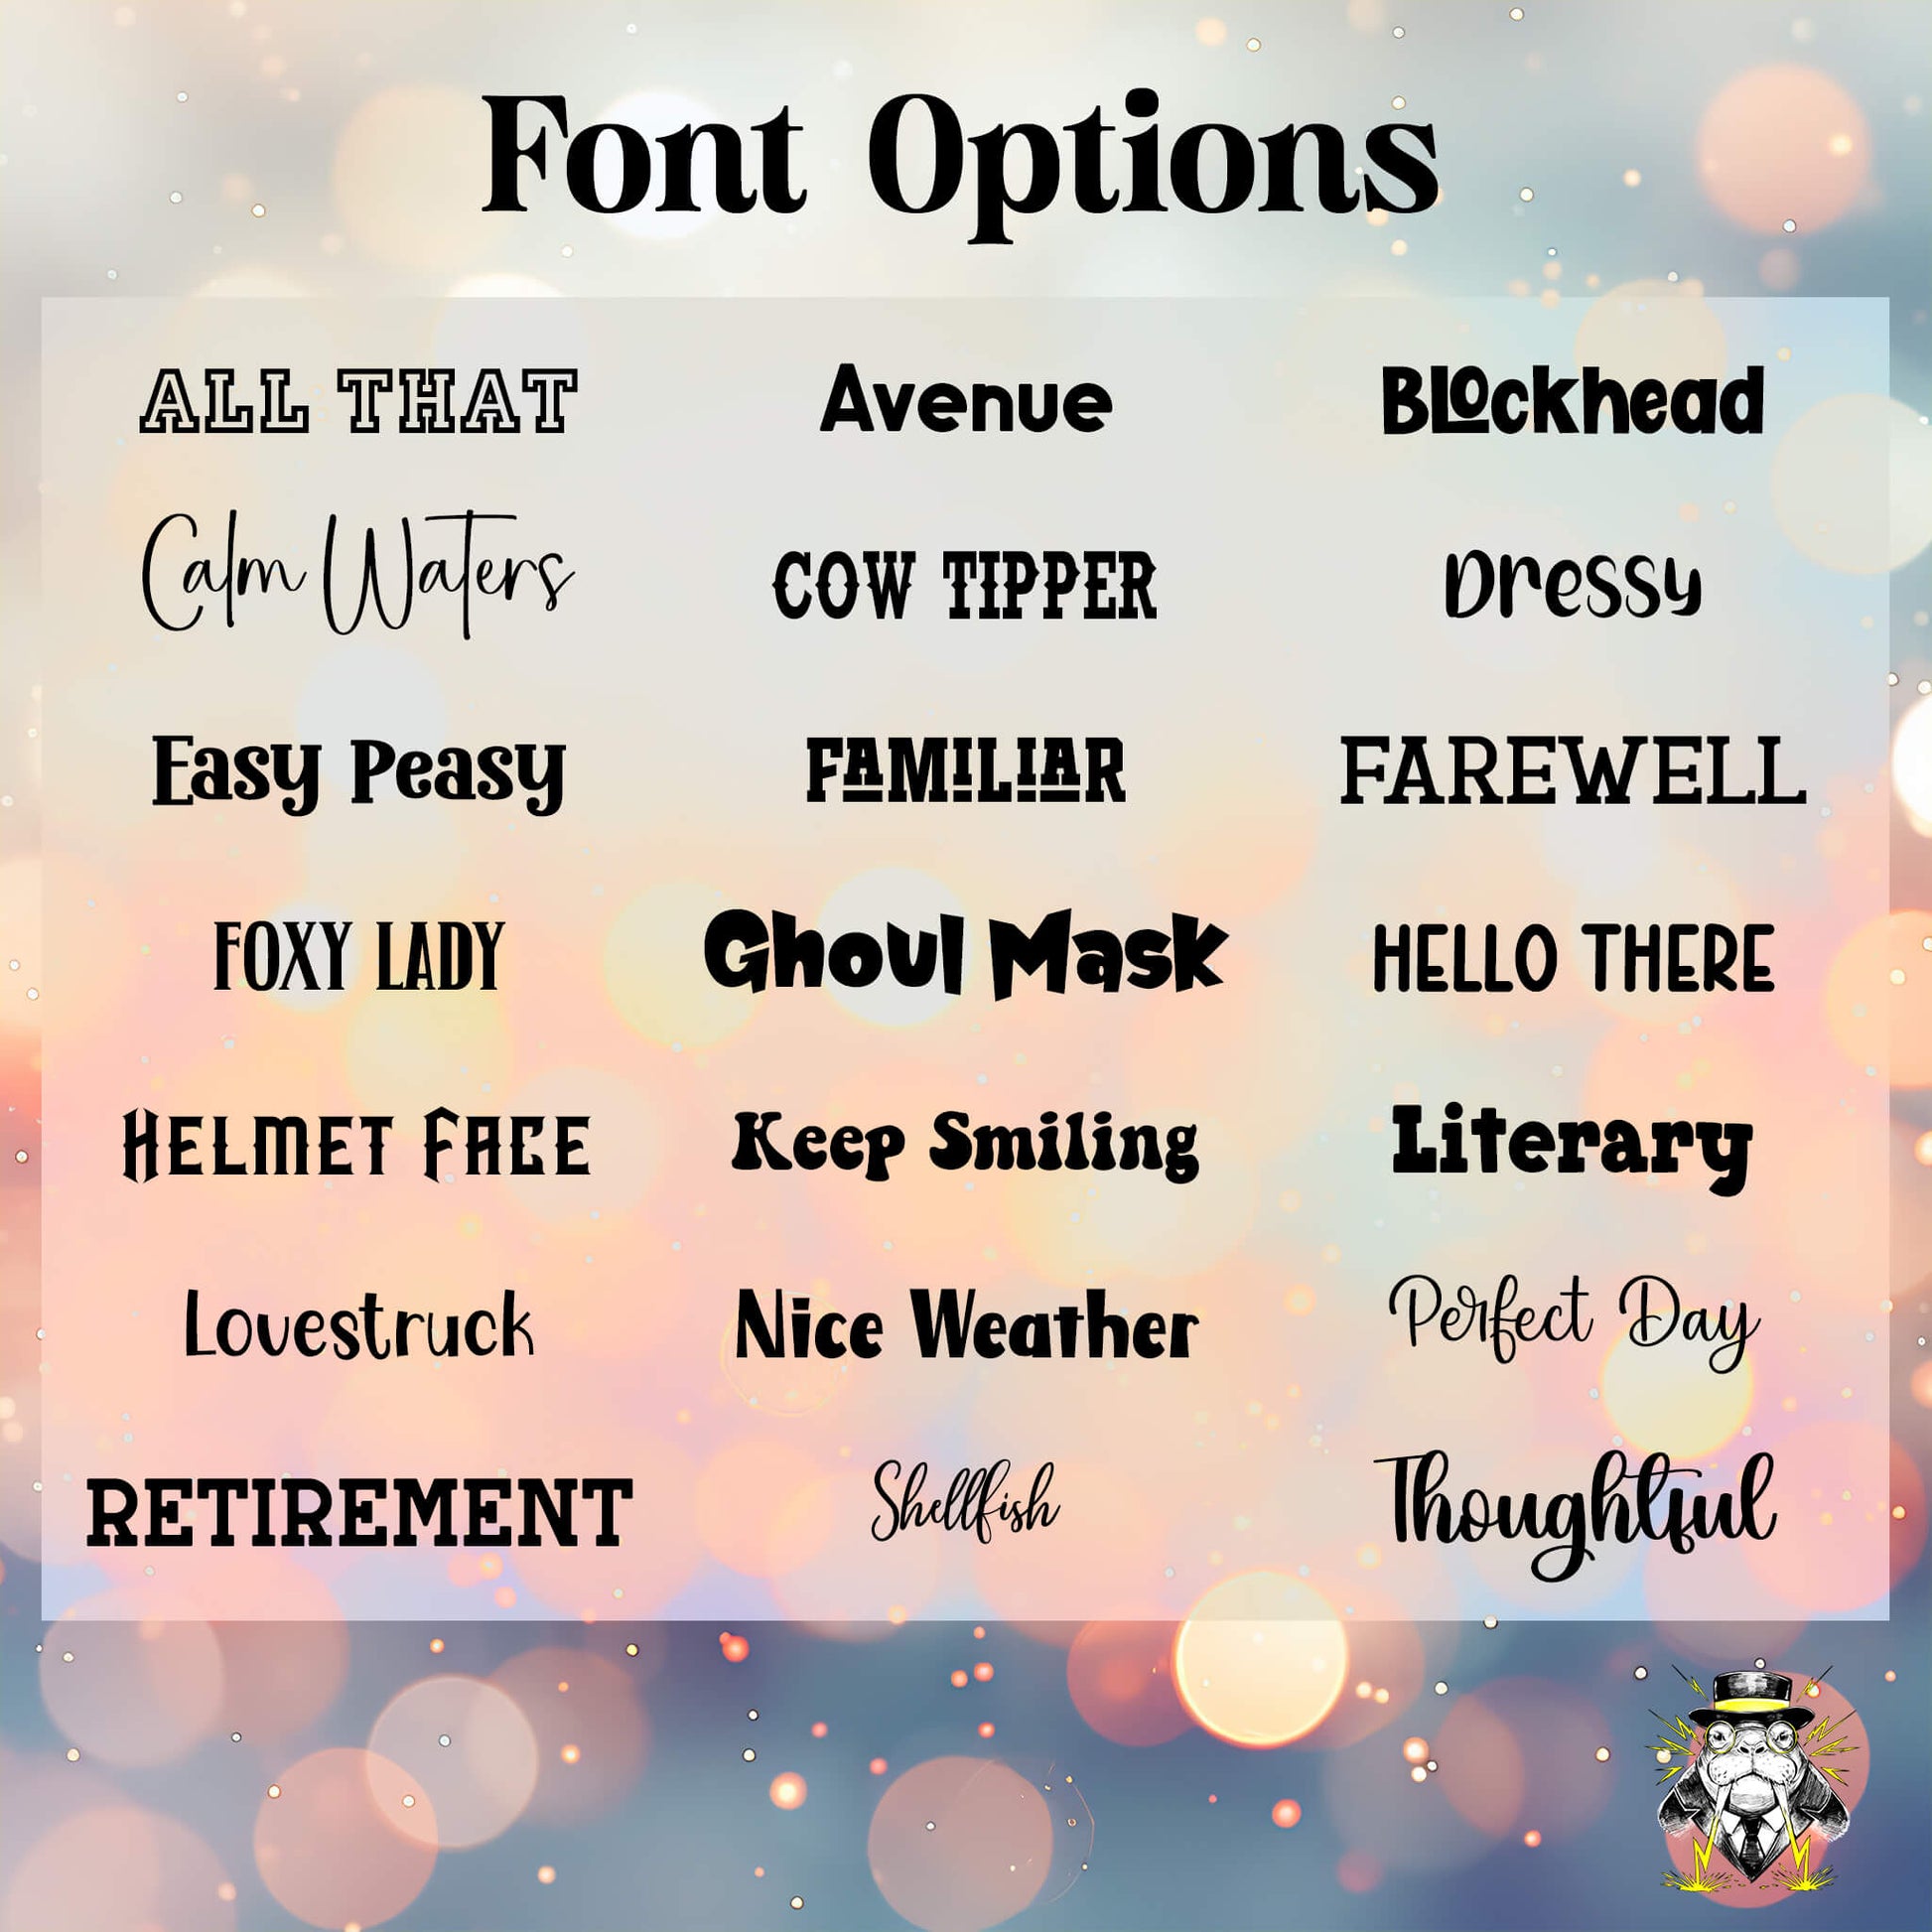 All 21 font options shown in their respective fonts.